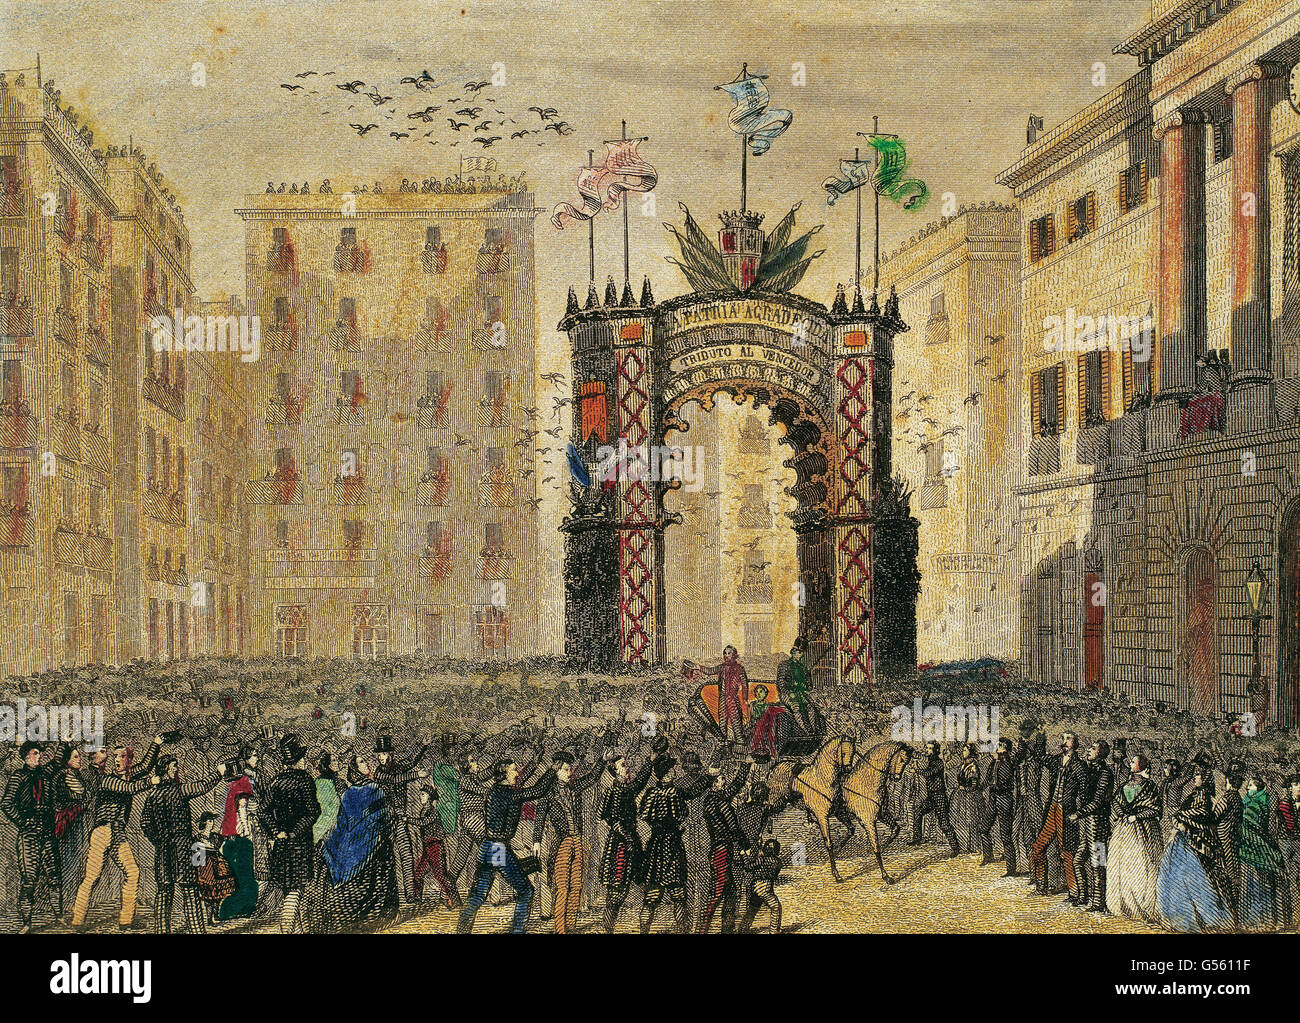 Spain. Catalonia. Barcelona. Juan Prim y Prats (1814-1870). Spanish military and politician. Amazing reception after the Hispano-Moroccan War (1859-1860) with a triumphal arch in the Saint James square on September 8, 1860. Colored engraving. 19th century. Stock Photo